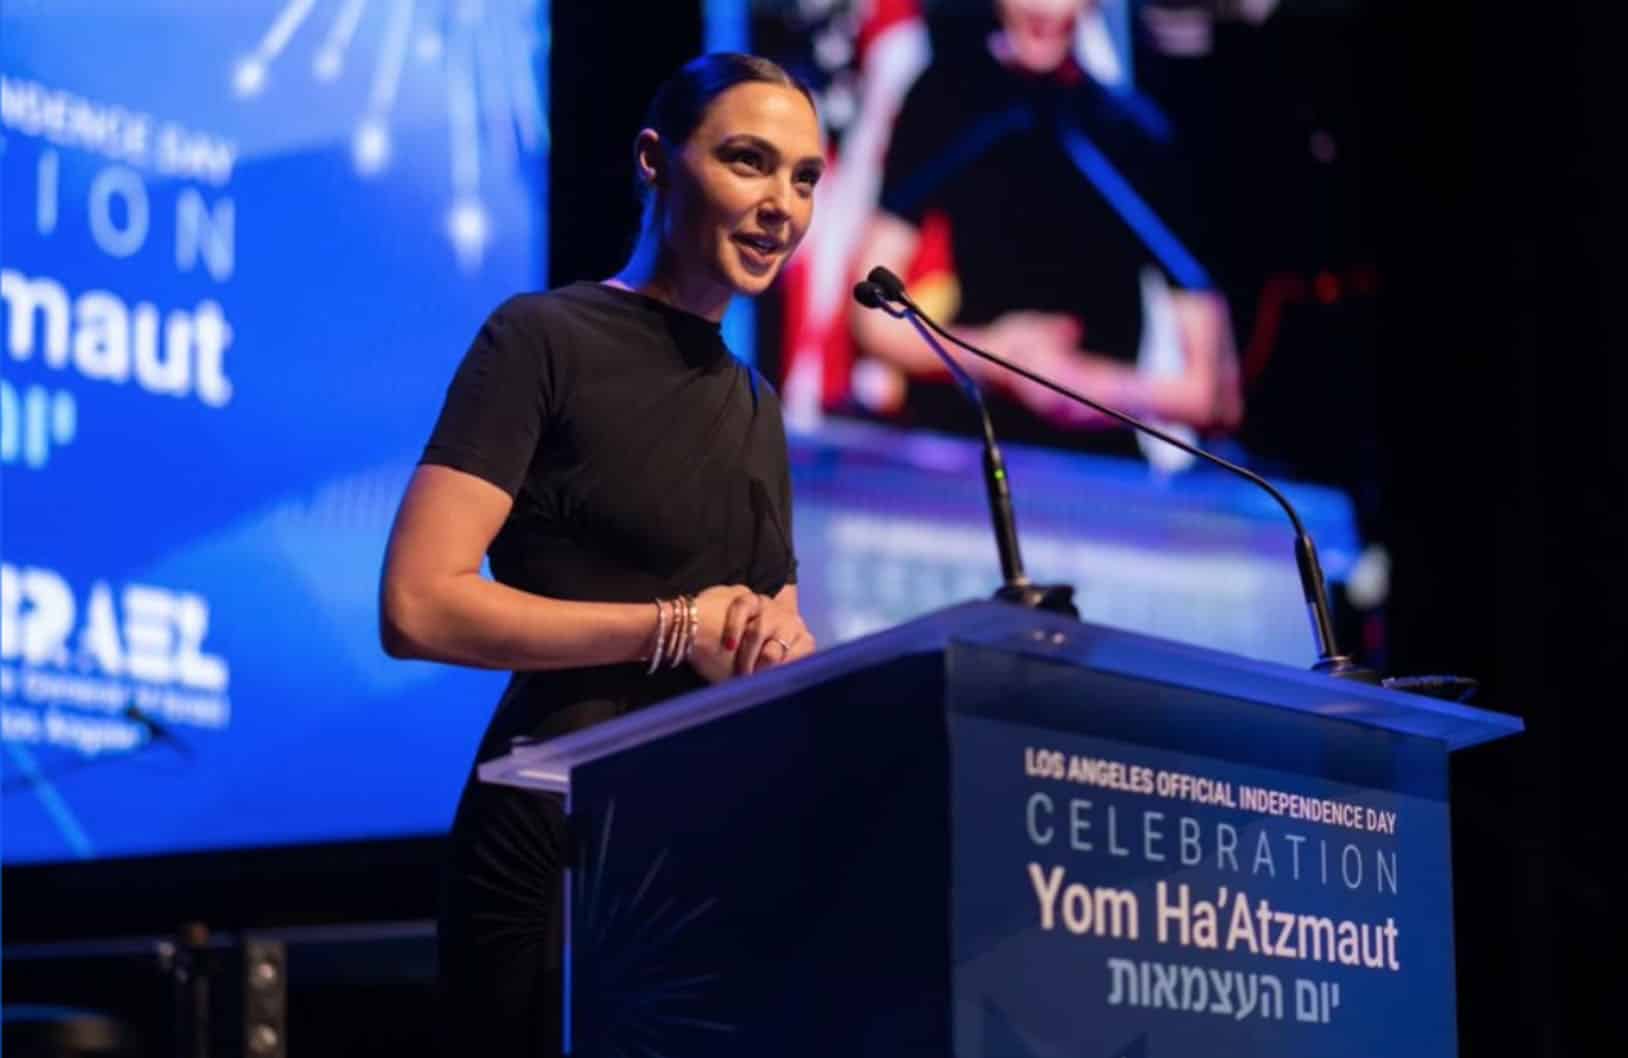 Gal Gadot to Israel Supporters: “You're the most important audience for me”